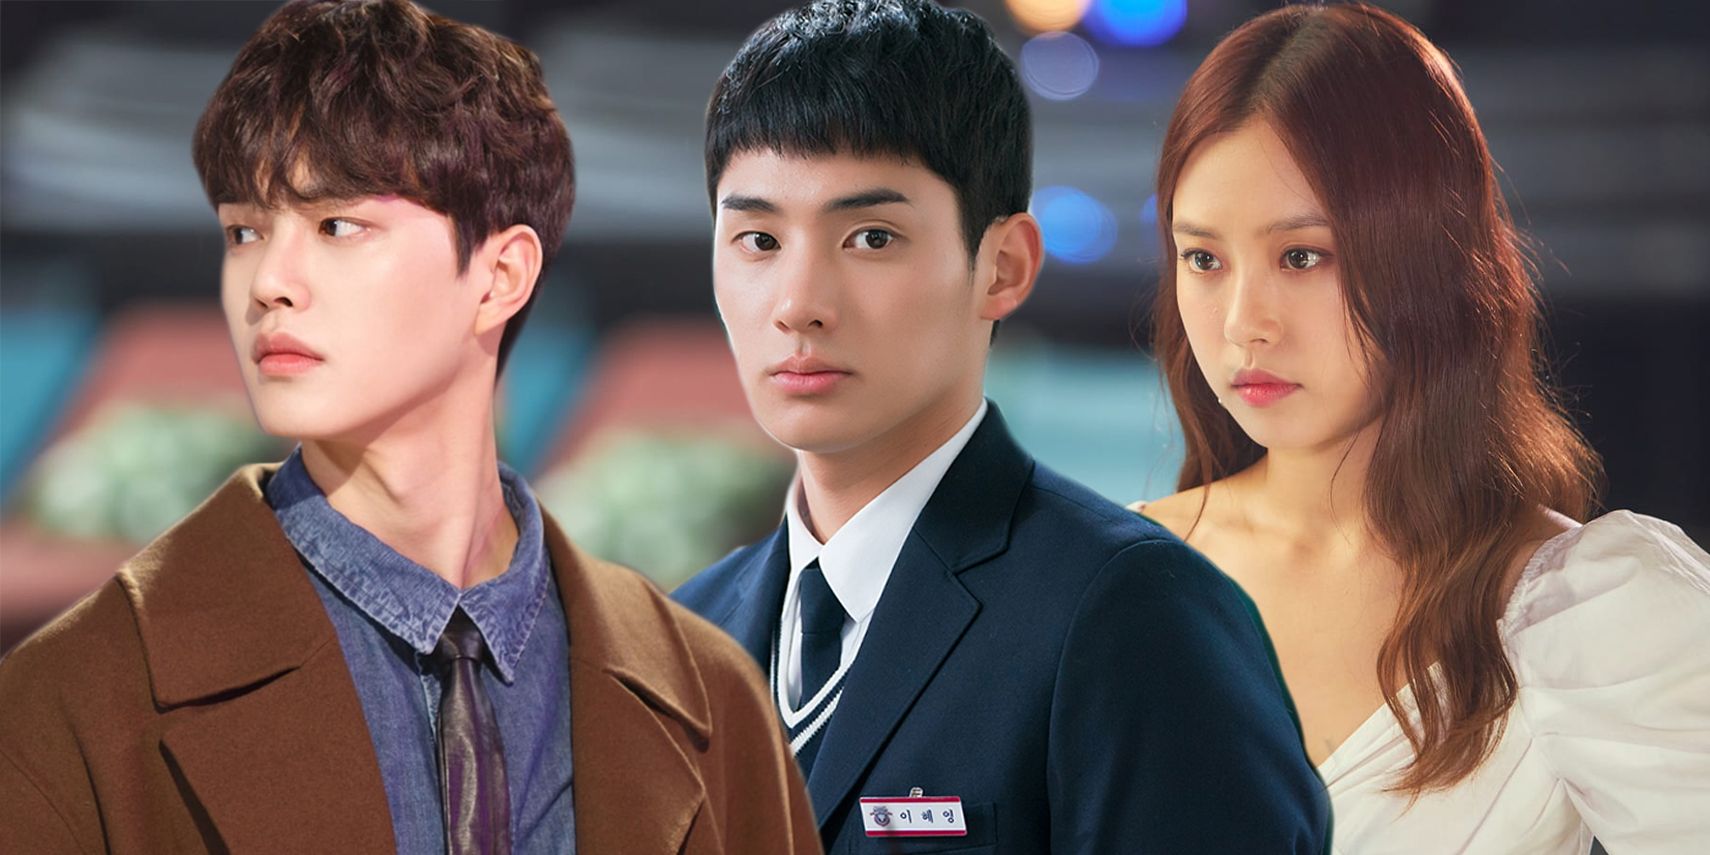 Sun-oh, Hye-Young and Gul-mi main characters in Love Alarm